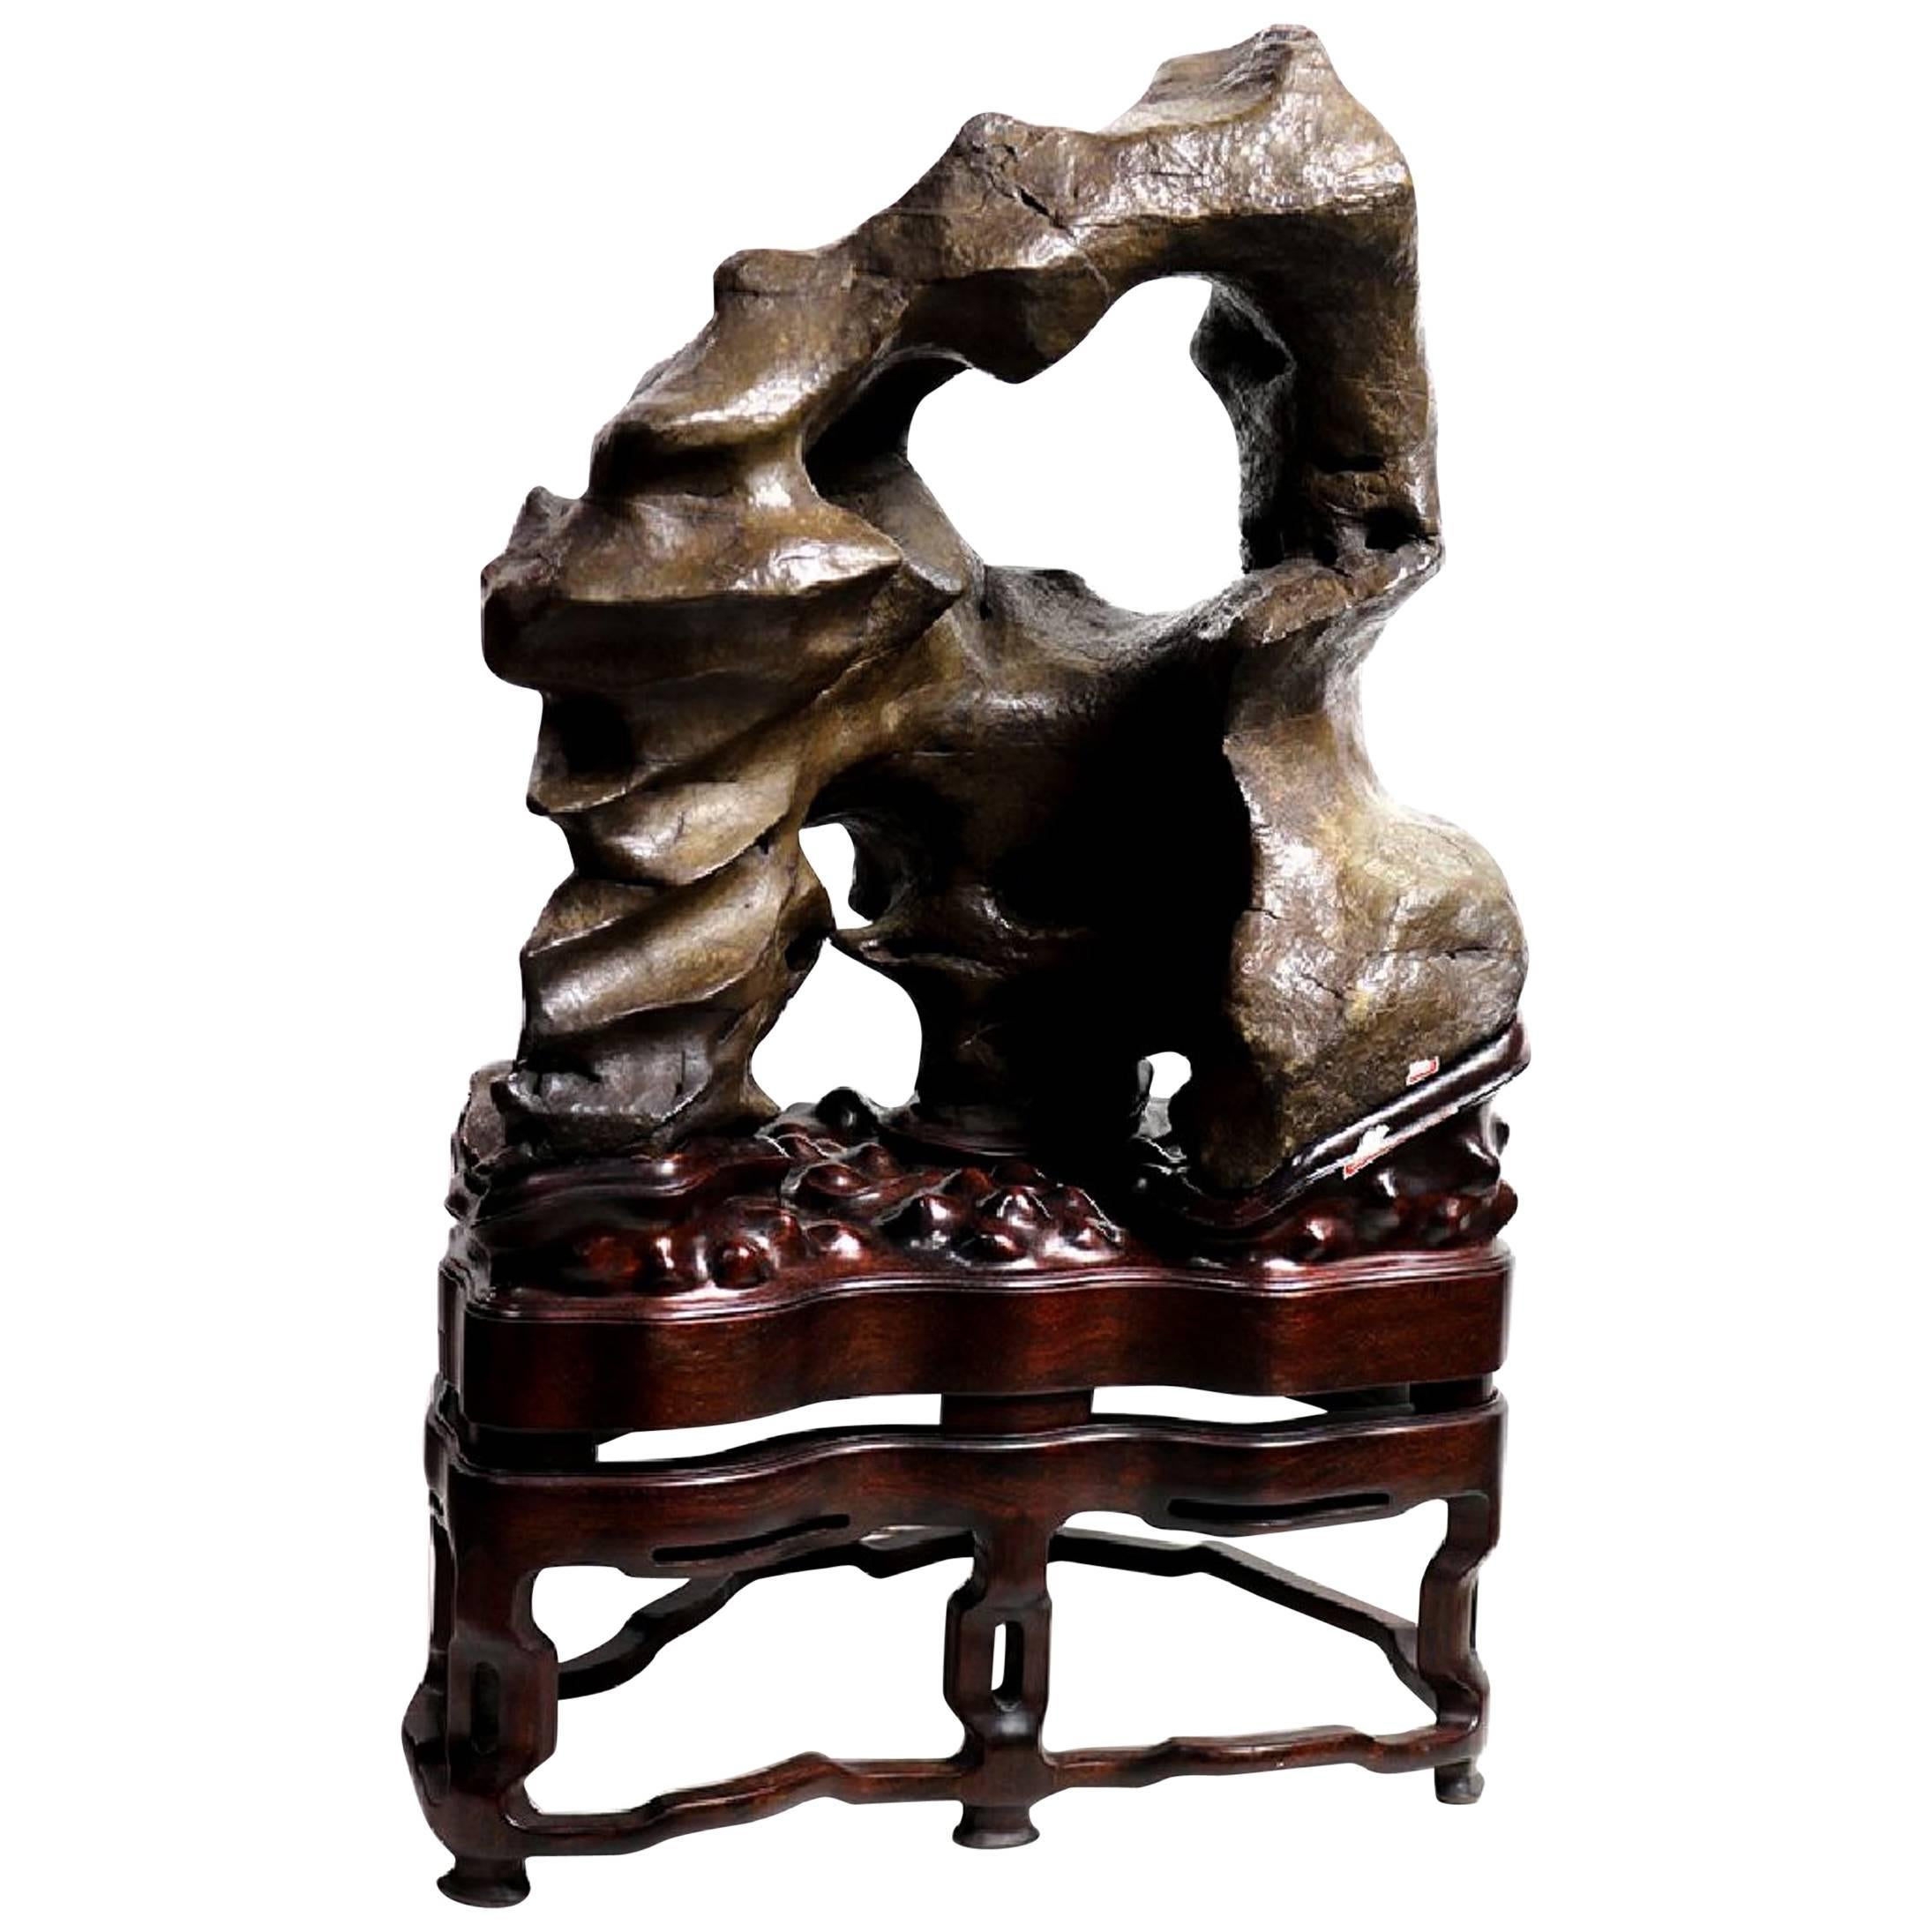 On offer is an extraordinary and very rare Chinese Scholar Rock (also known as Gongshi, the meditate rock) on a custom stand, the rock is from Lingbi, one of the four famous historical scholar rock-producing towns in China. The scholar rock is